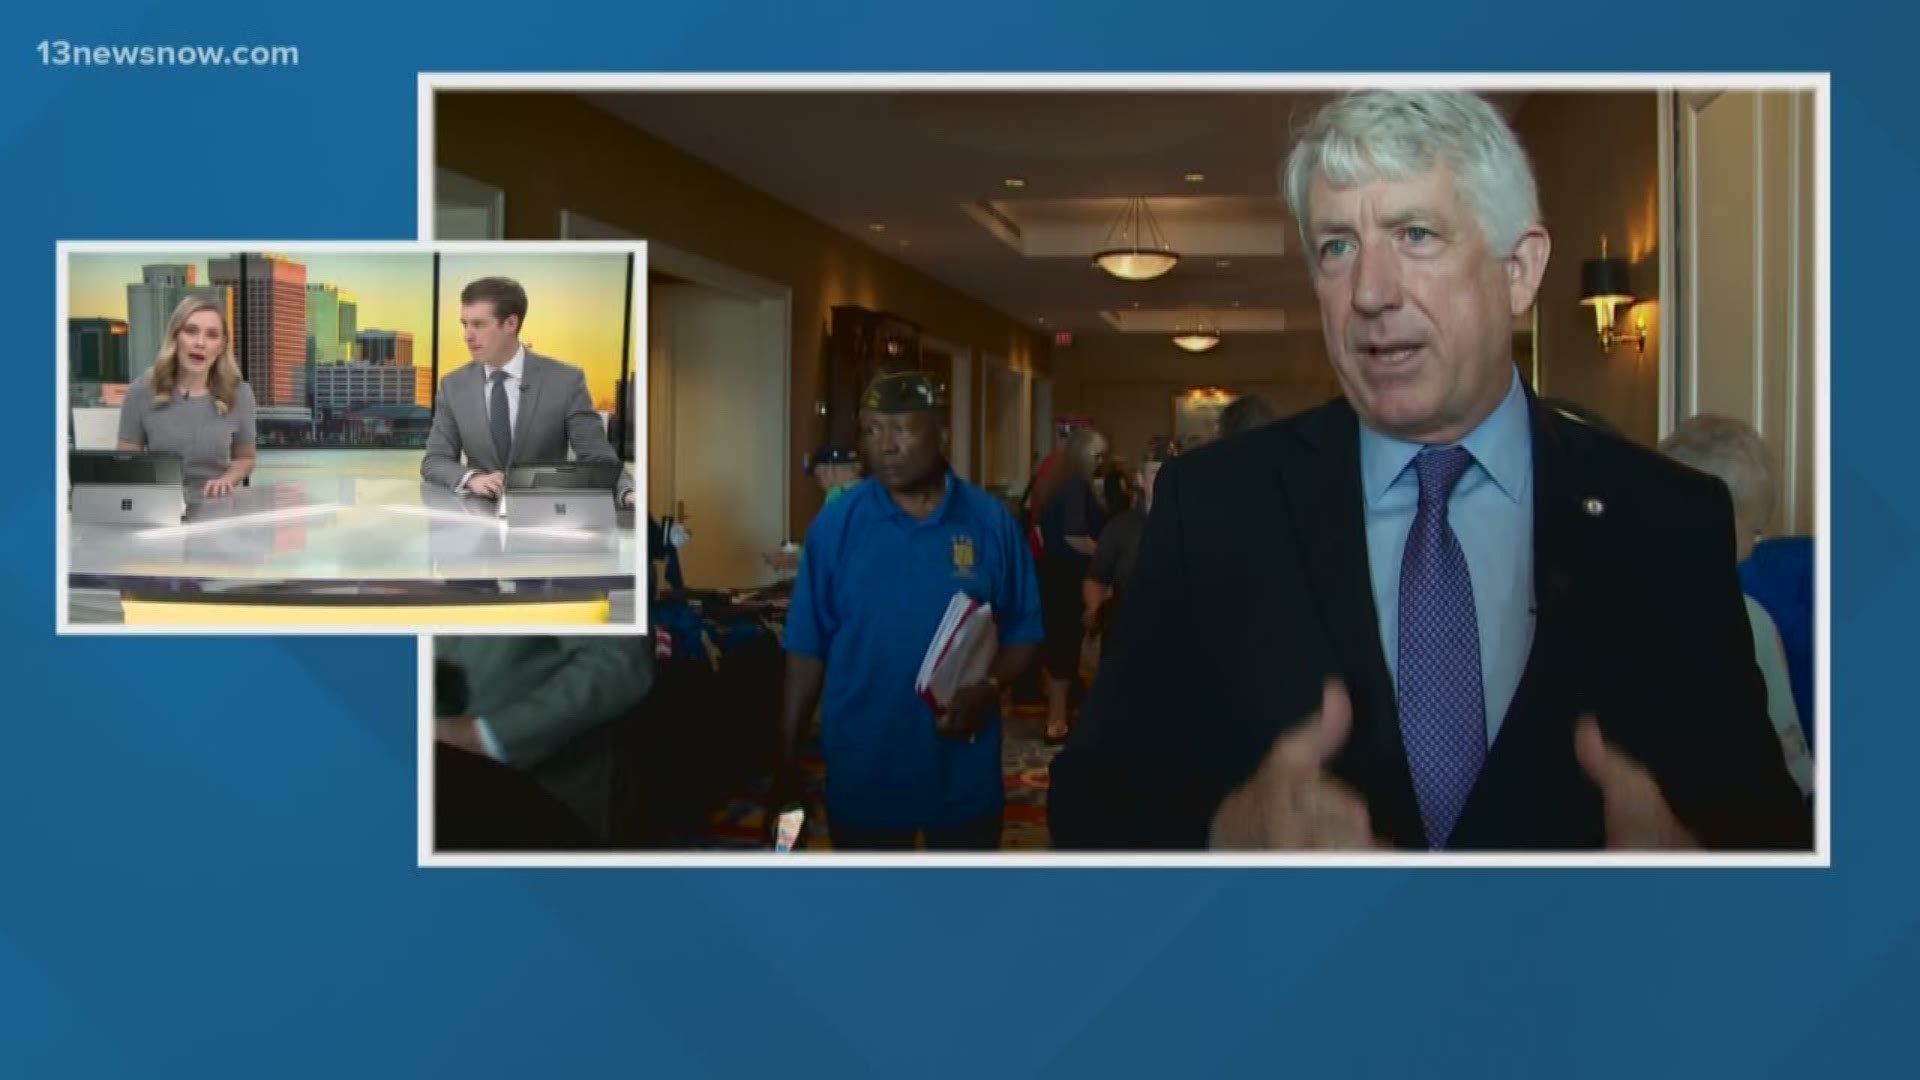 Virginia Attorney General Mark Herring apologized for wearing blackface at a party in 1980. His acknowledgment comes after Governor Ralph Northam made a similar admission.